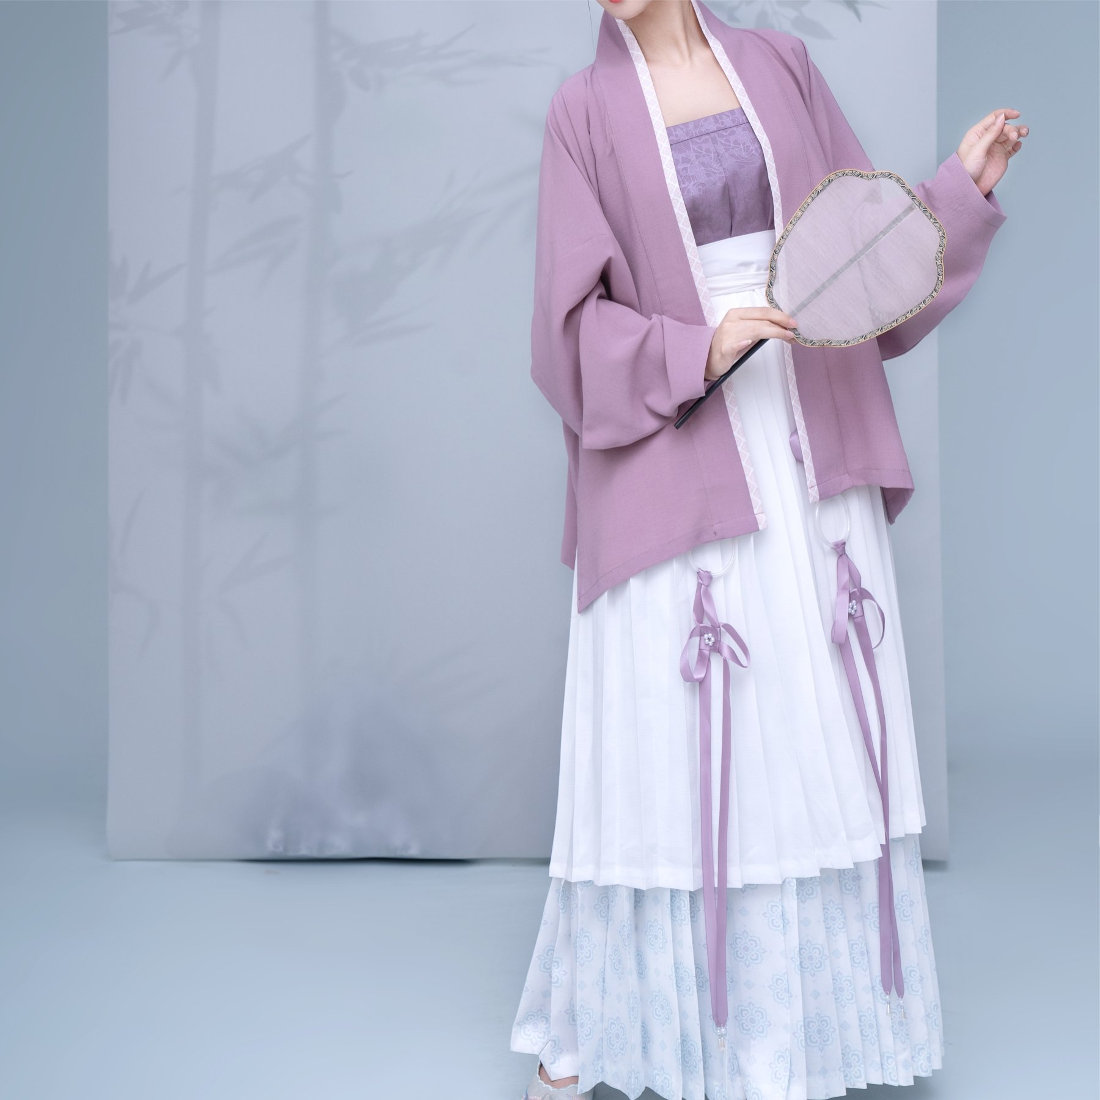 ivoci - Types of Hanfu Skirts & Their Differences - 11